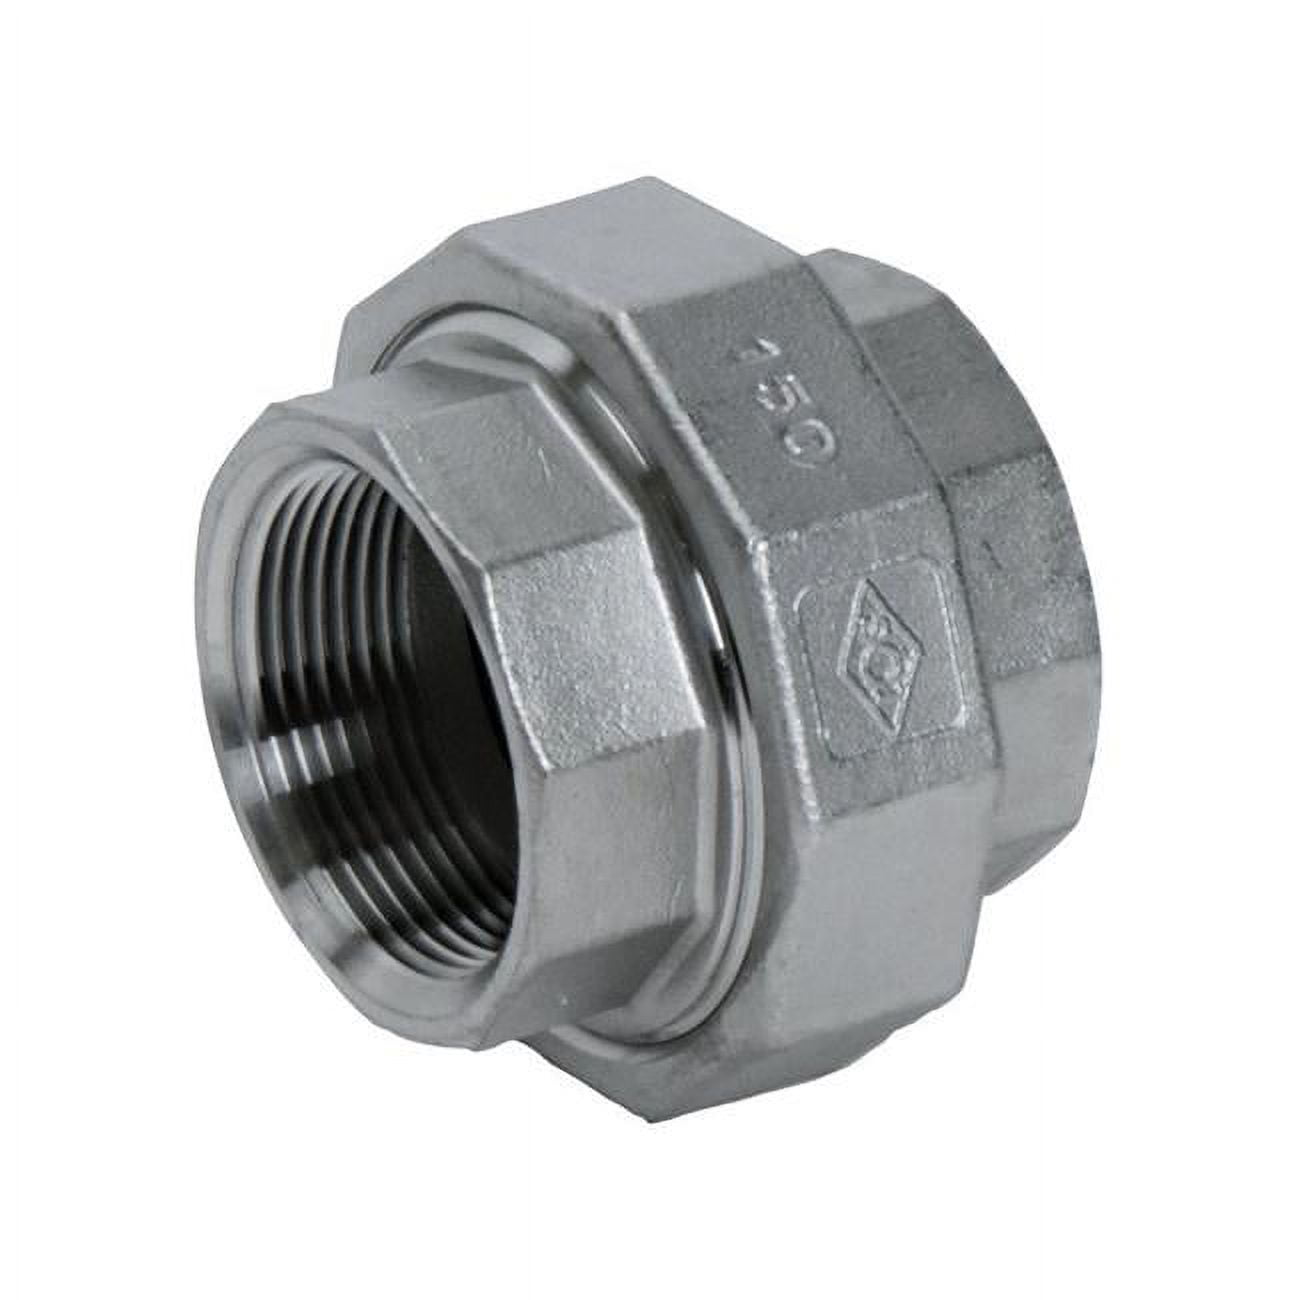 4810297 Stainless Steel Union - 1 In. X 1 Dia.